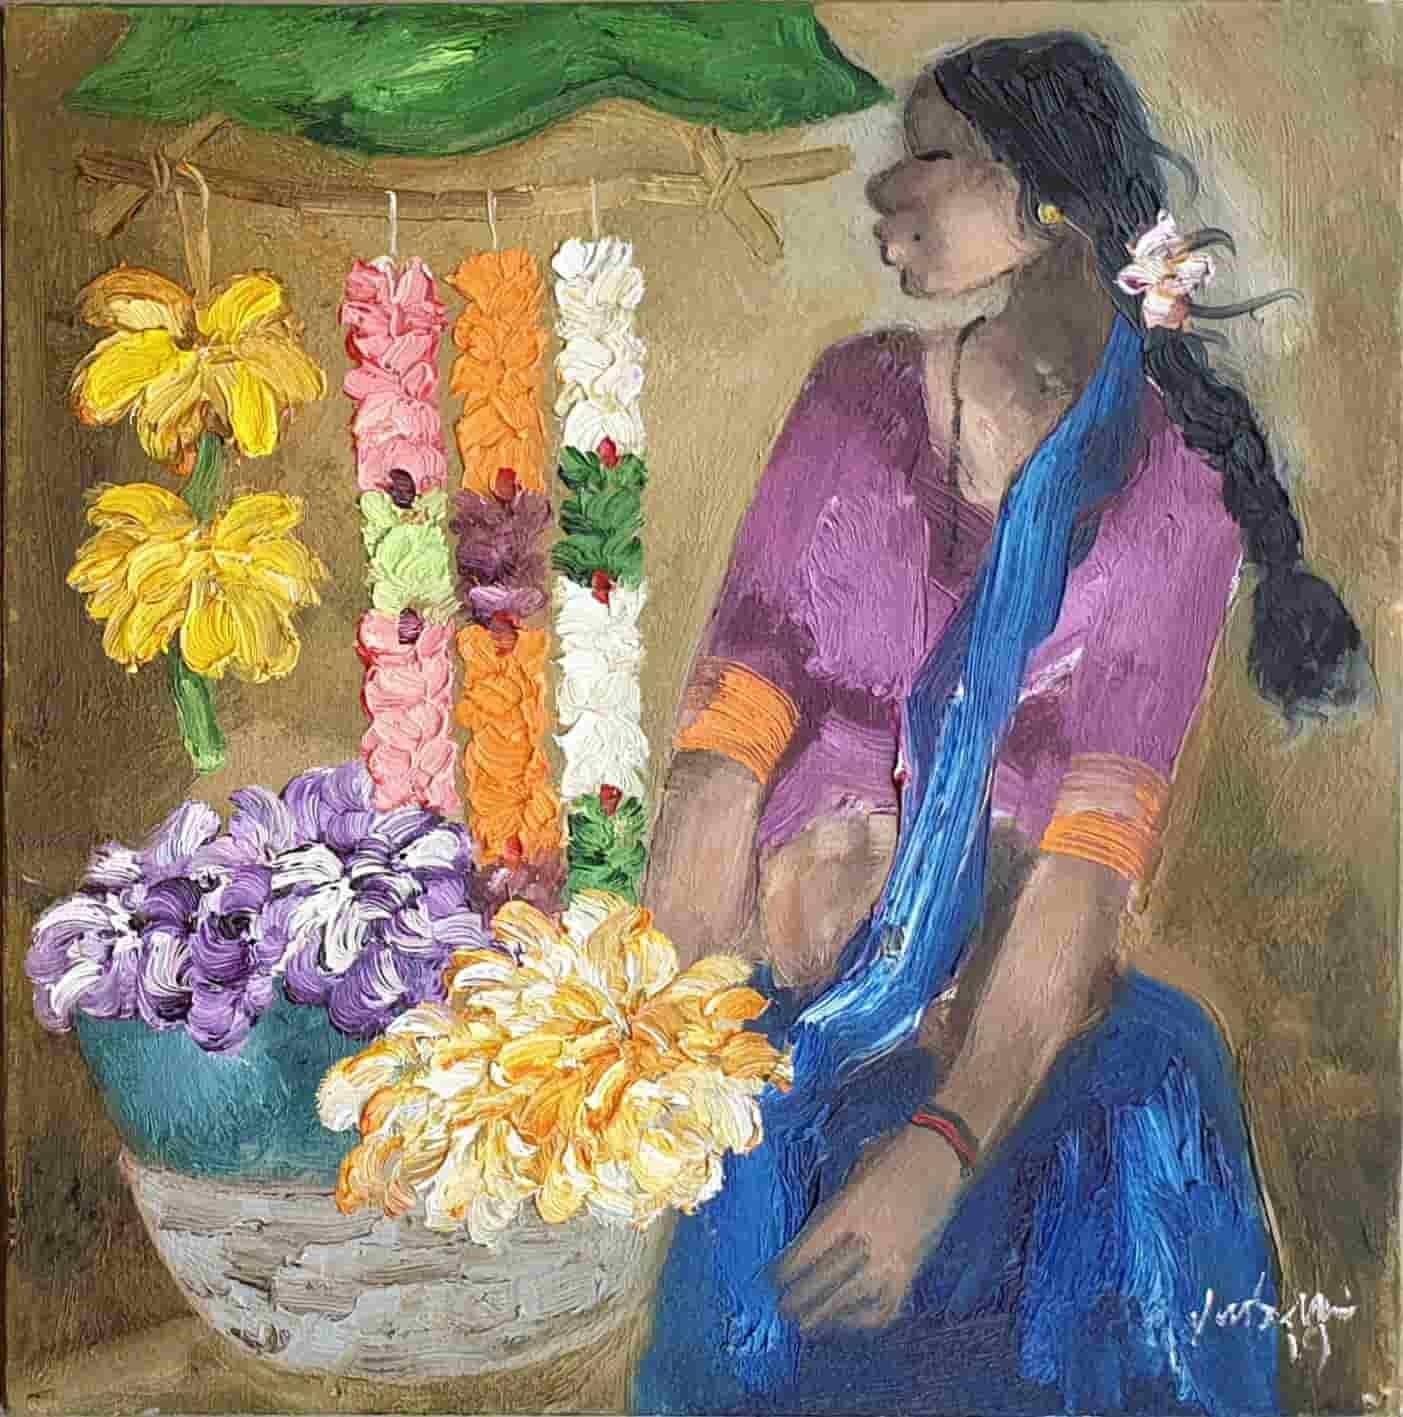 Man Selling Balloons and Woman Flowers, Oil on Canvas Brown Green 